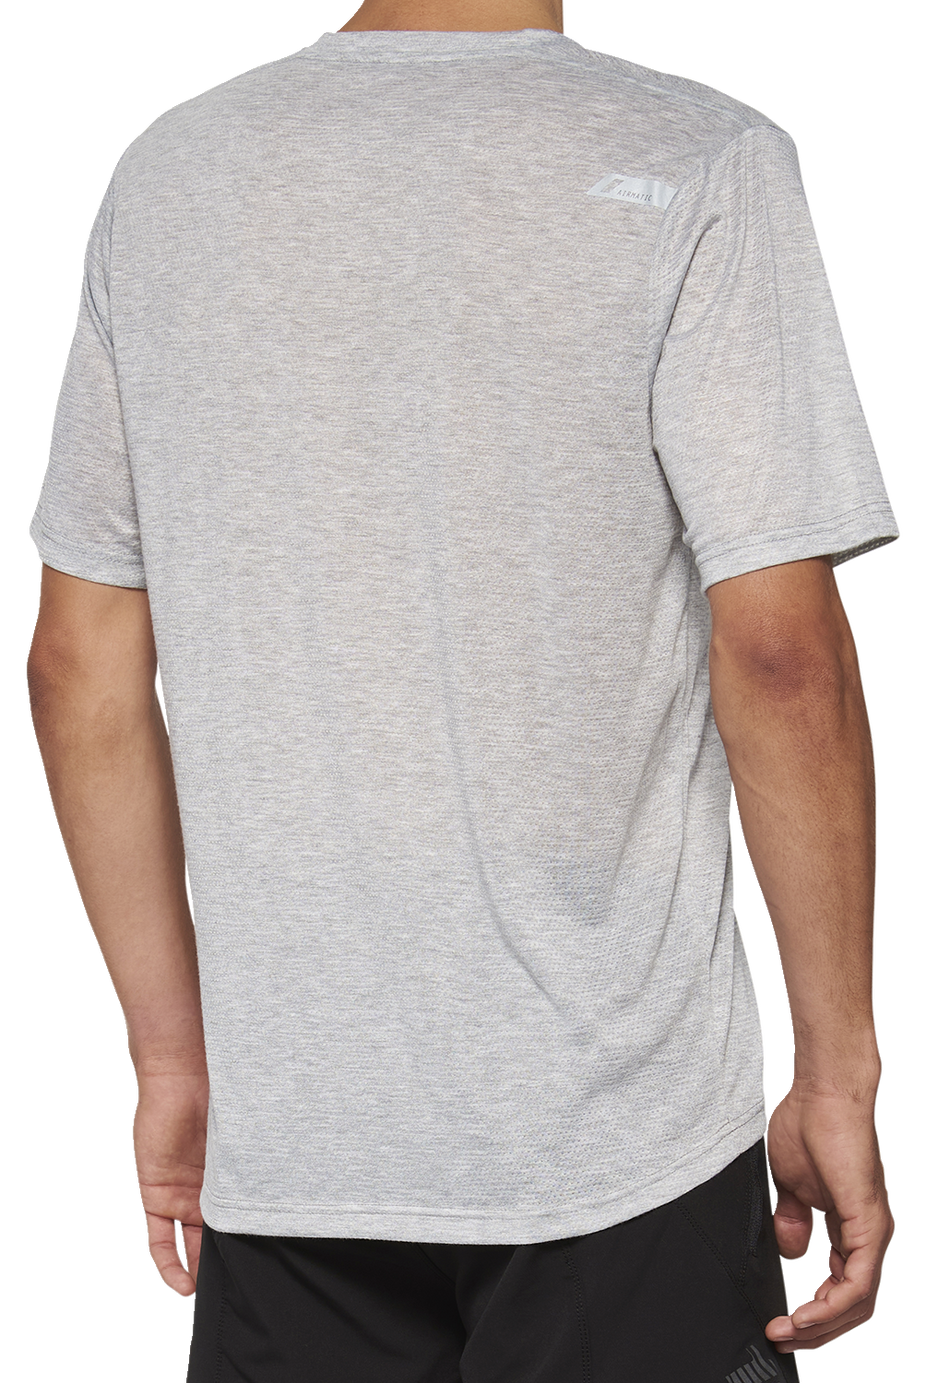 100% Airmatic Mesh Jersey - Short-Sleeve - Gray - Large 40016-00007